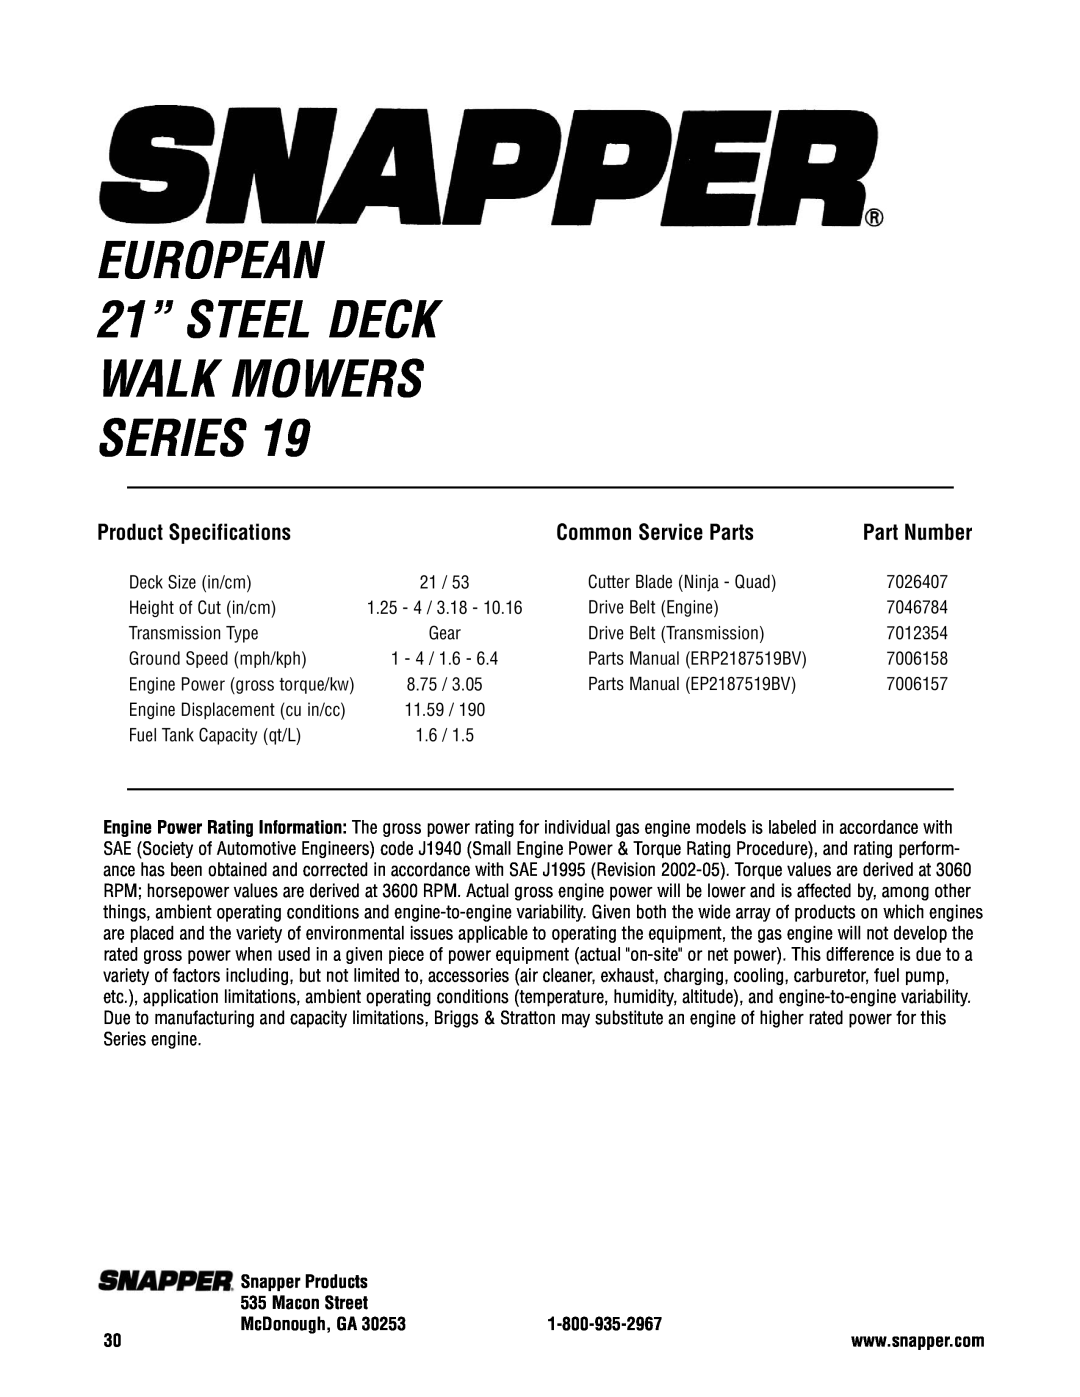 Snapper ERP2187519BV, EP2187519BV Product Specifications, Common Service Parts, Part Number, Snapper Products, European 